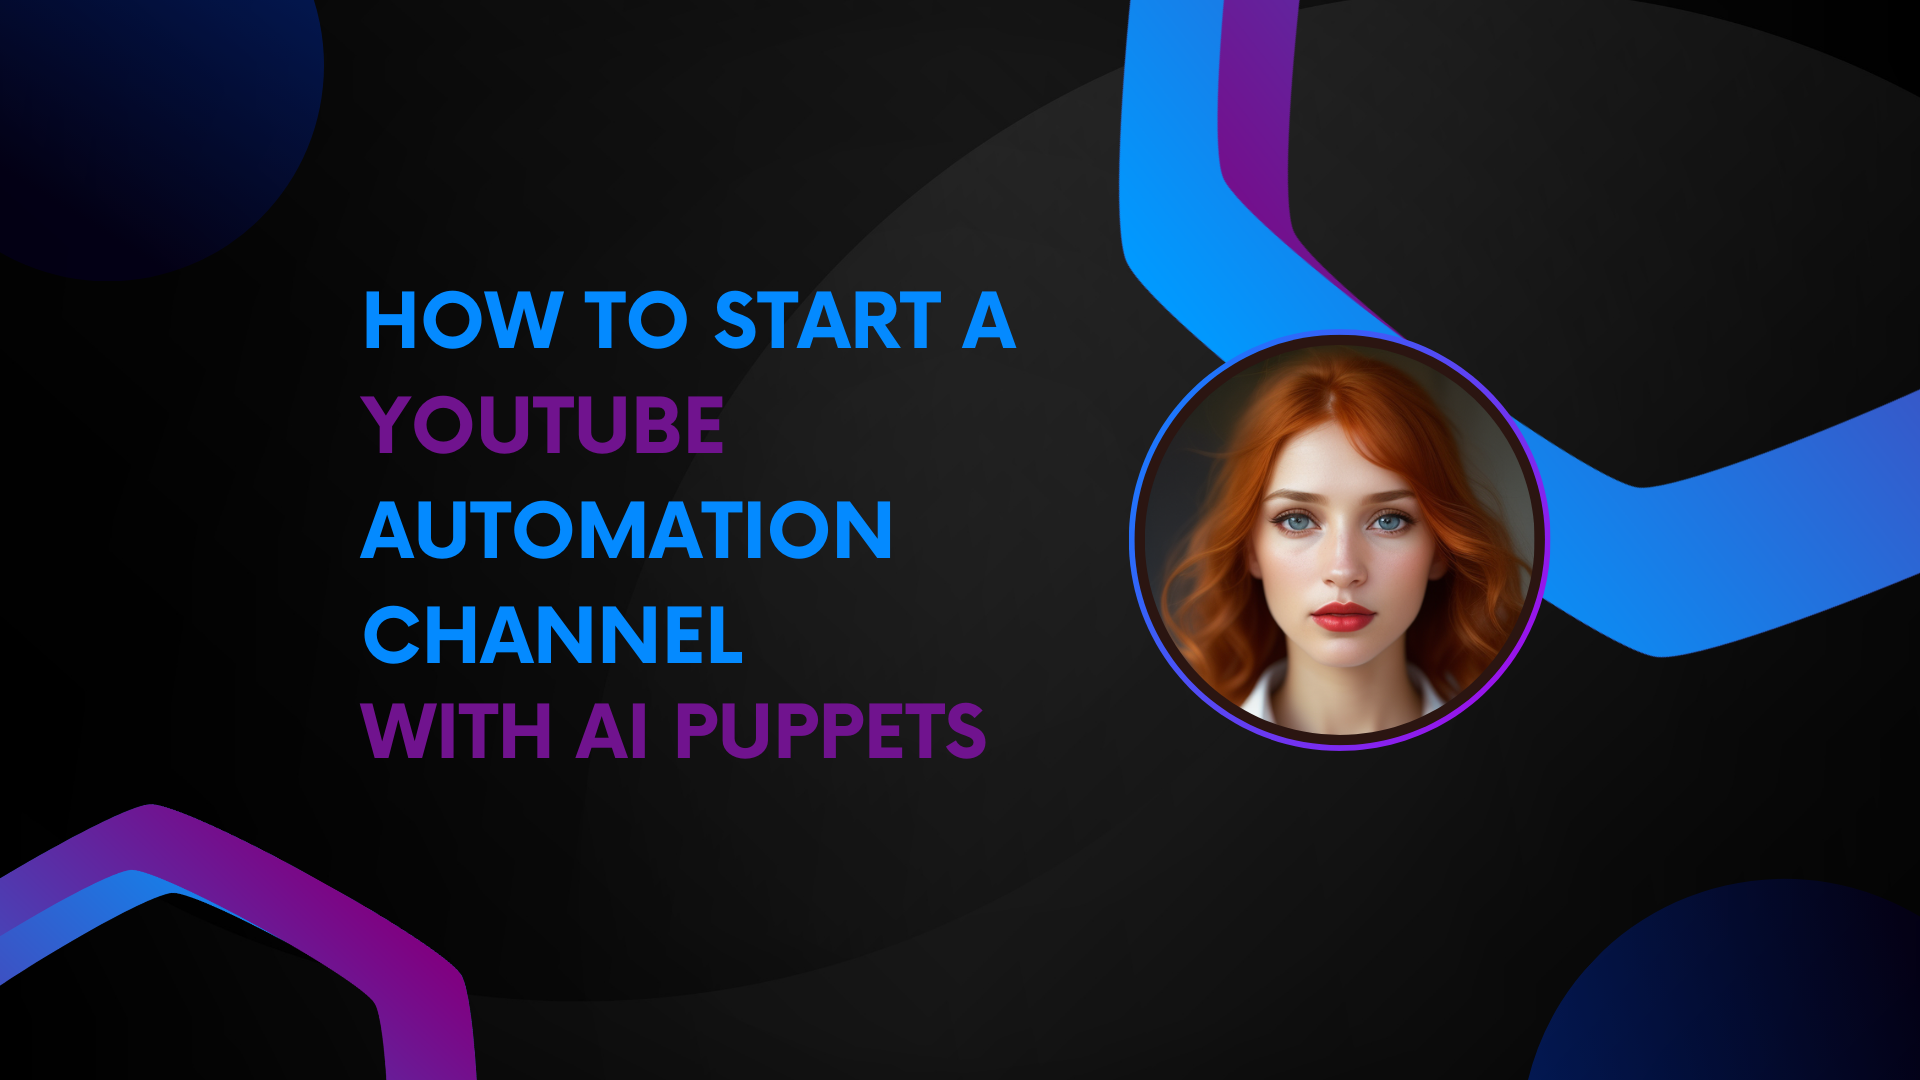 How to Start a YouTube Automation Channel with AI Puppets